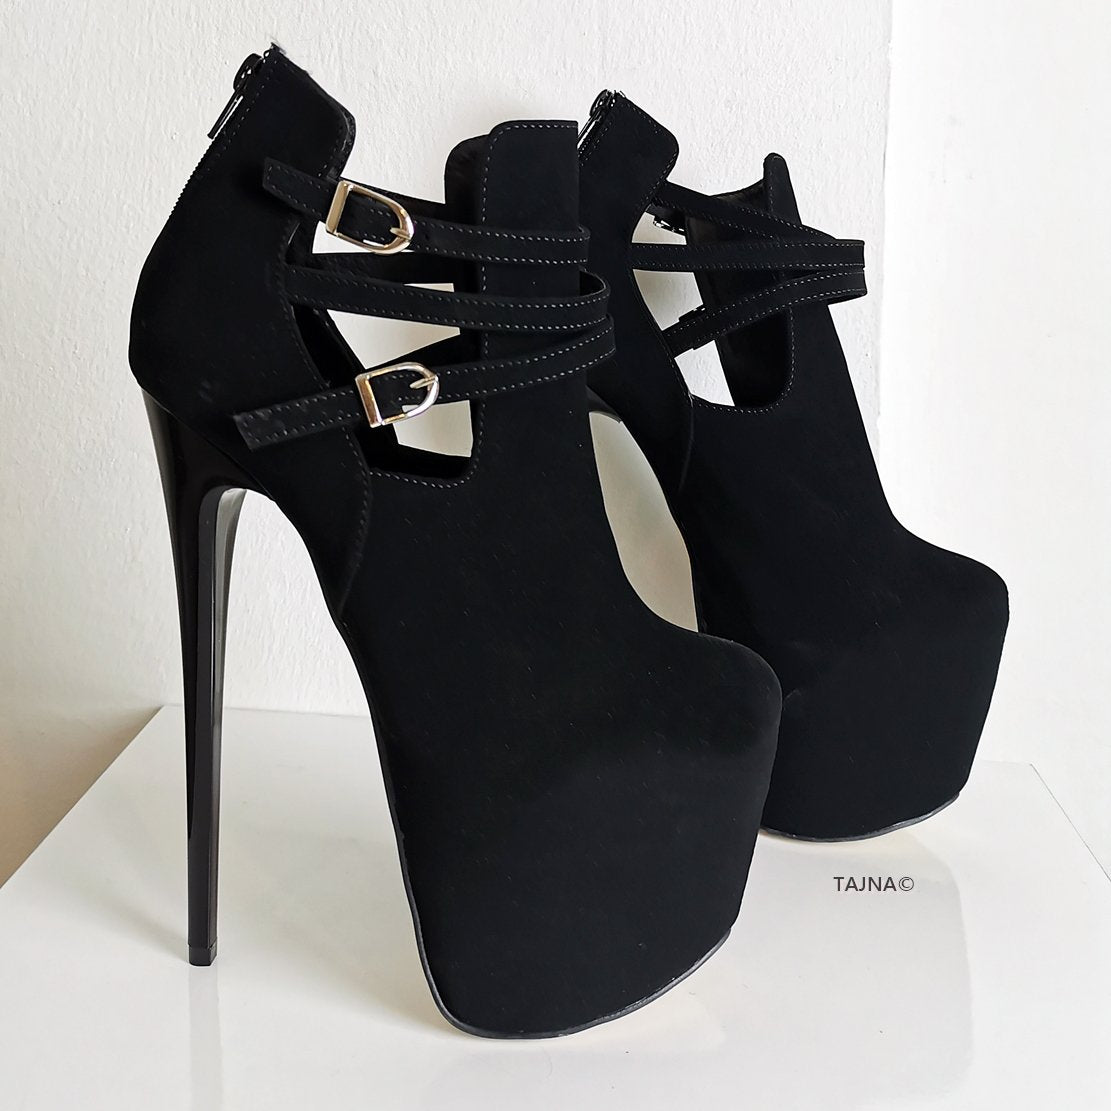 Suede Belted Ankle Platform Booties | Tajna Club